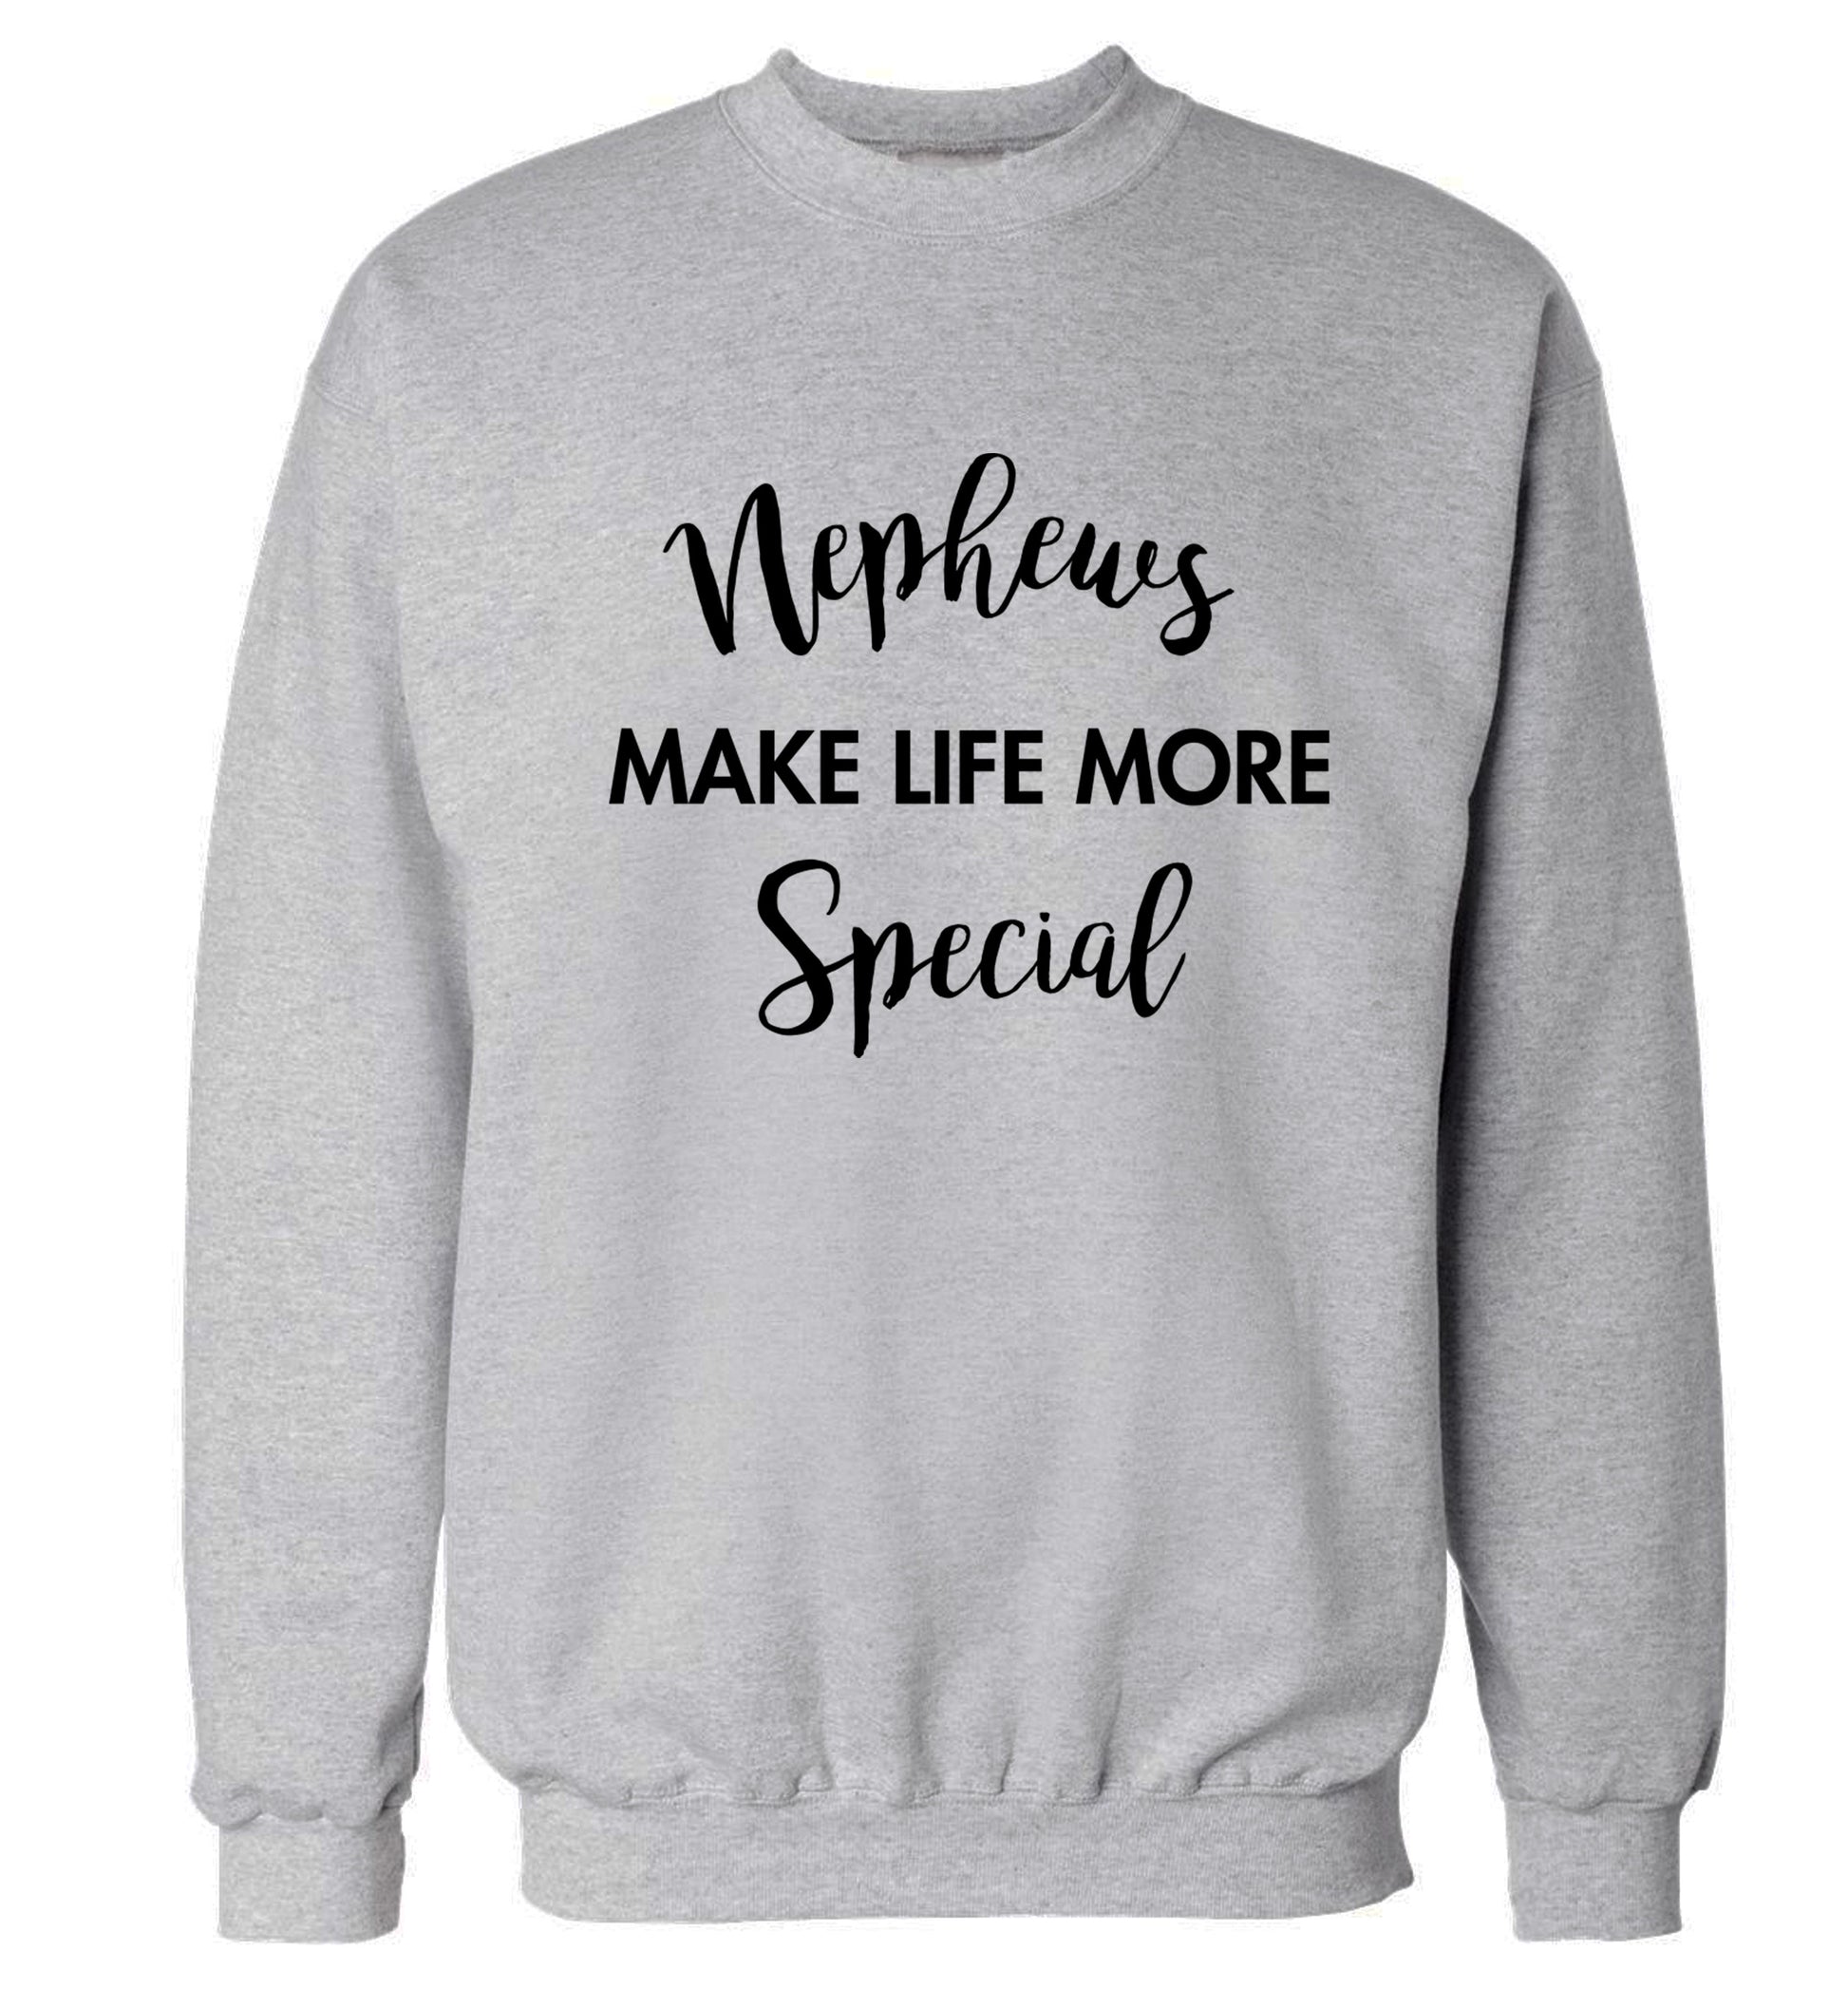 Nephews make life more special Adult's unisex grey Sweater 2XL